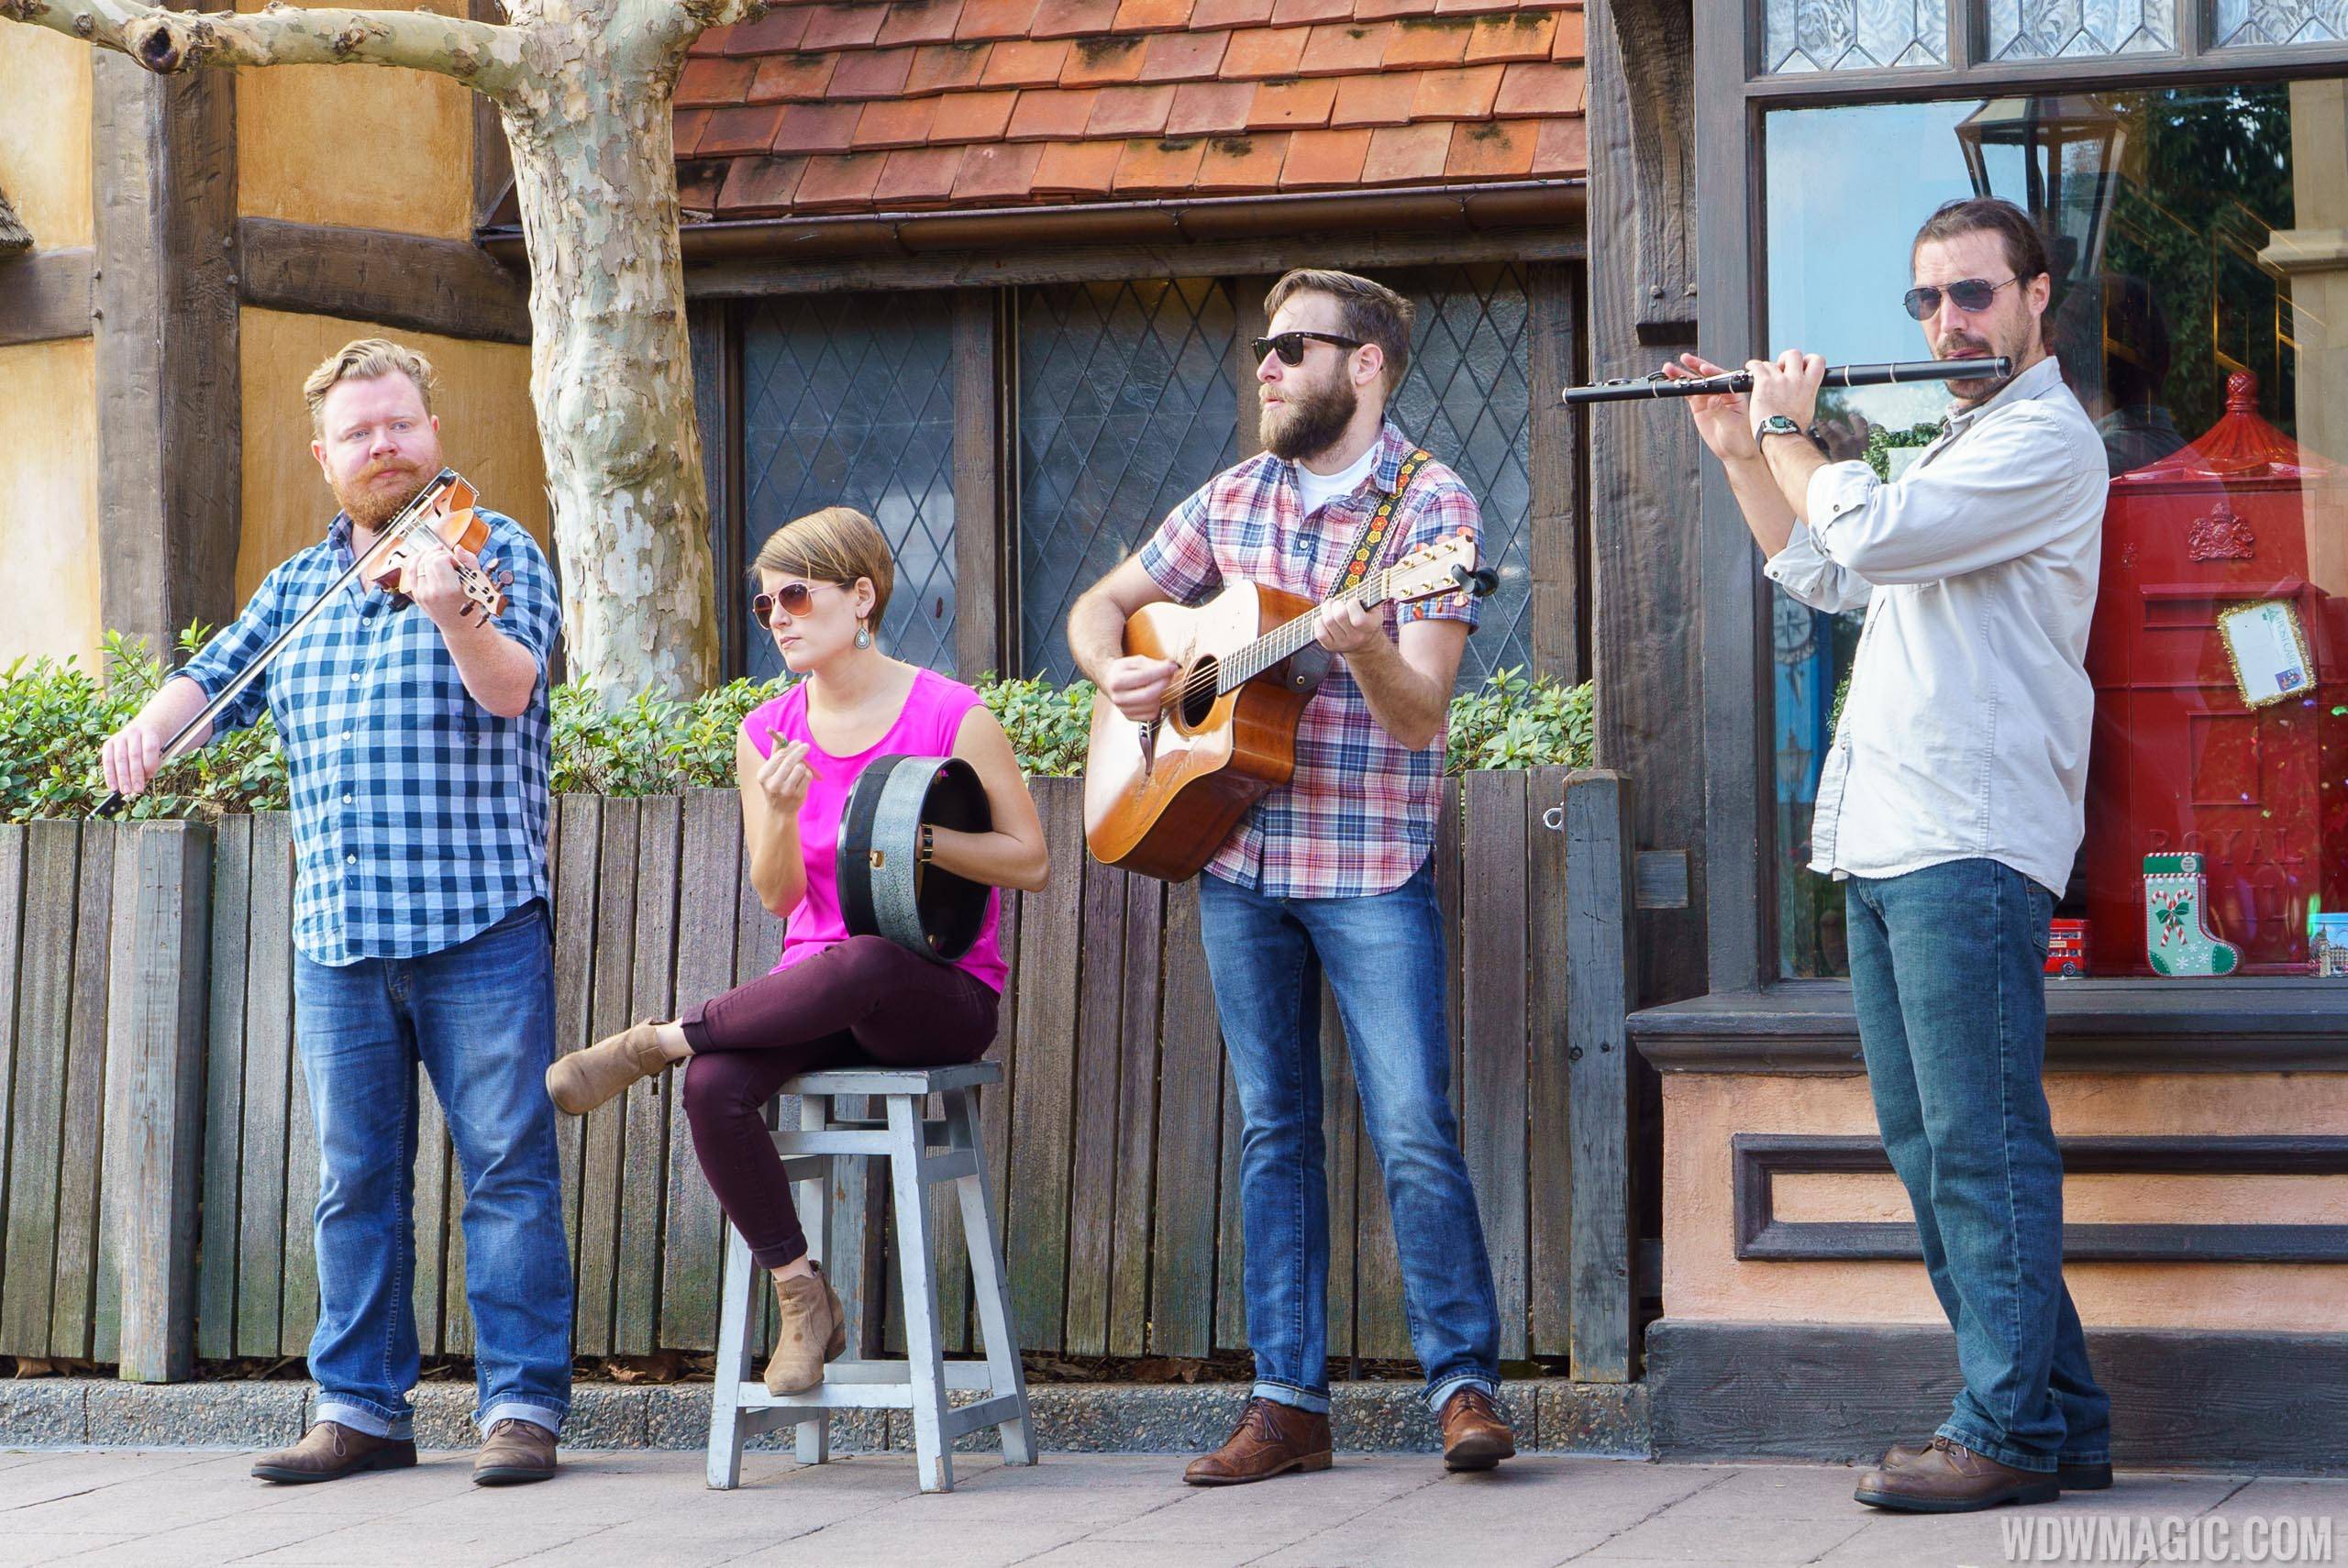 VIDEO - New acoustic group Quickstep debuts at Epcot's United Kingdom Pavilion